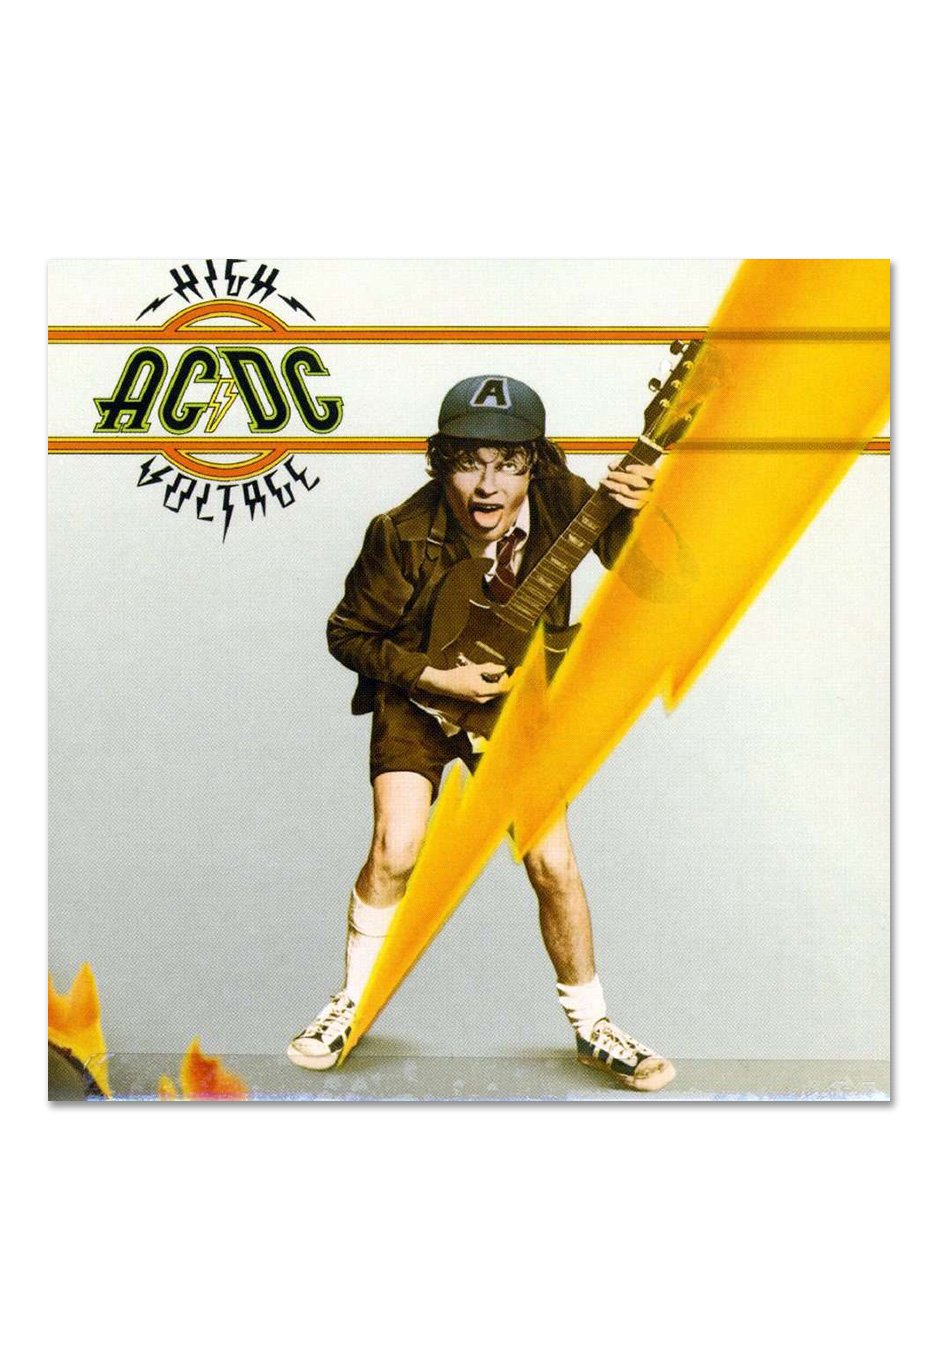 AC/DC - High Voltage (Limited 50th Anniversary Edition) Gold - Colored Vinyl